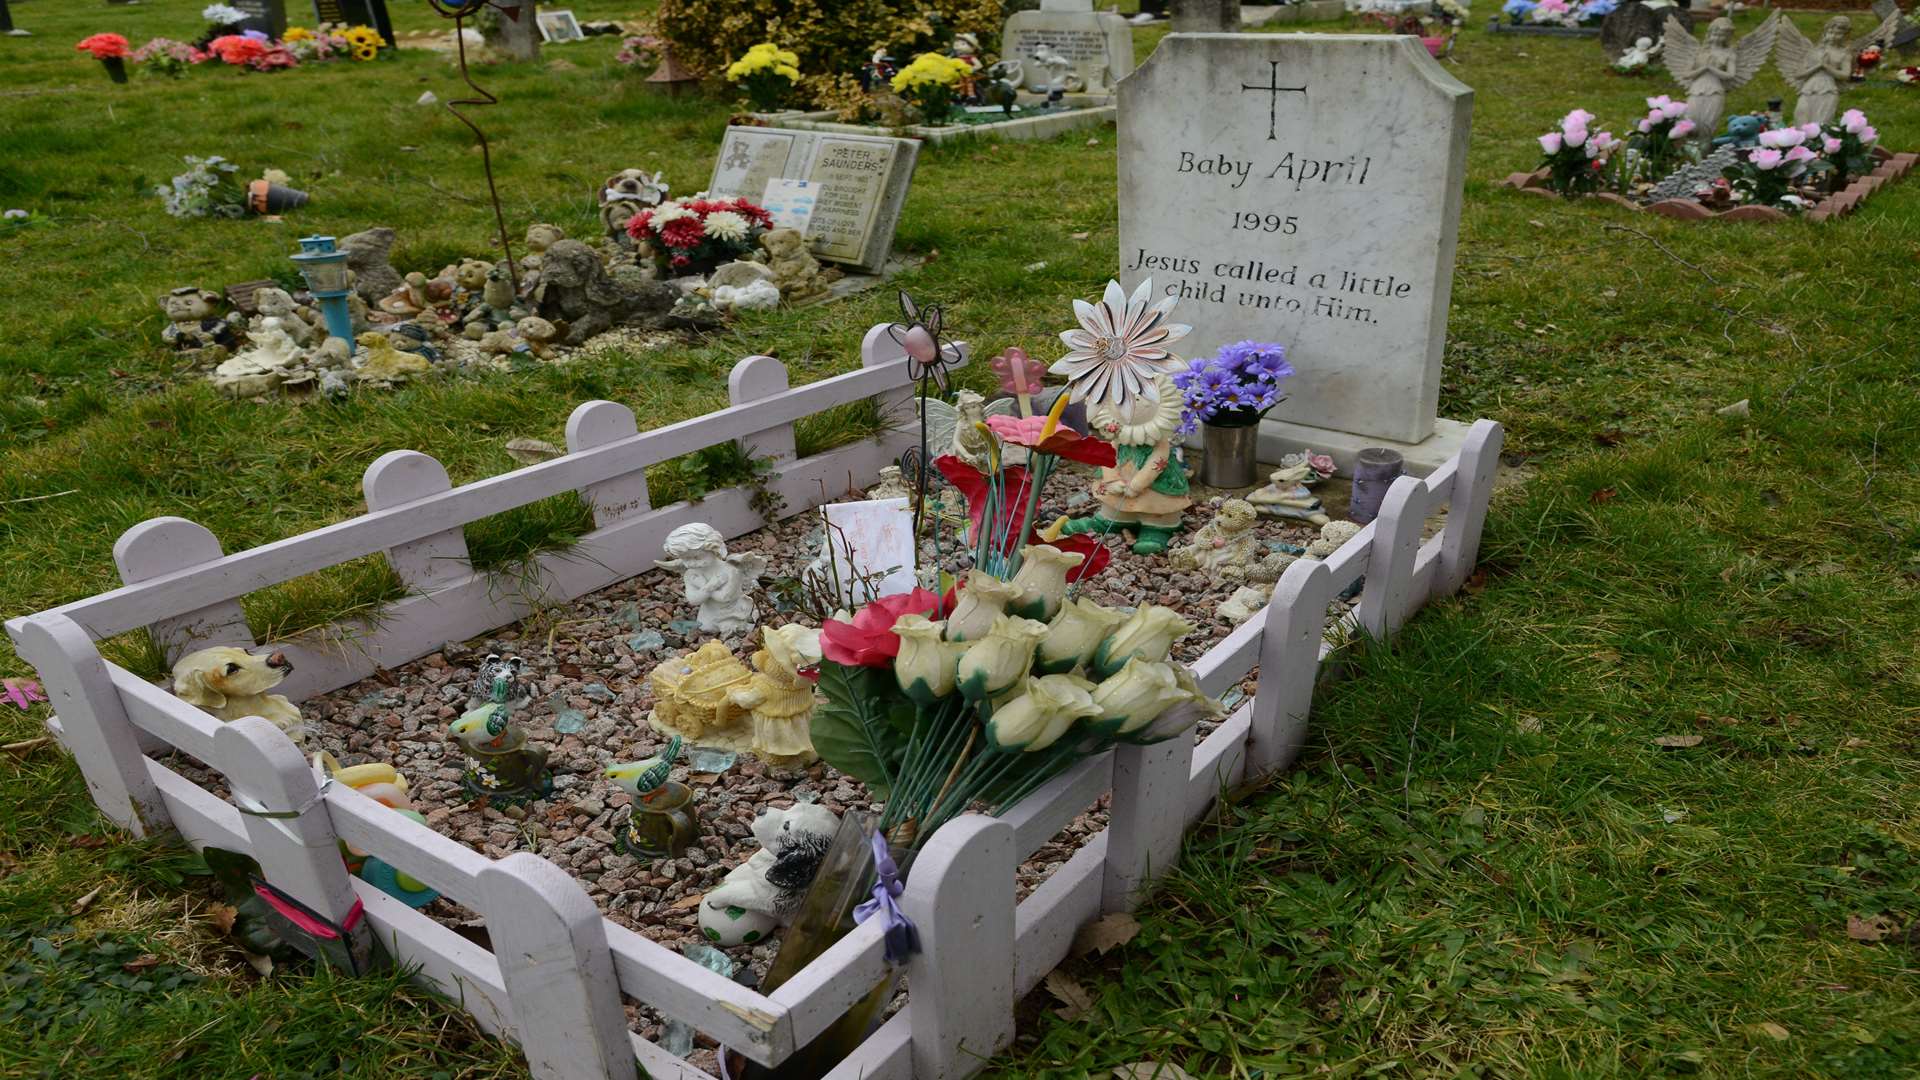 Baby April's grave - her death still touches many in Ashford. Picture: Gary Browne